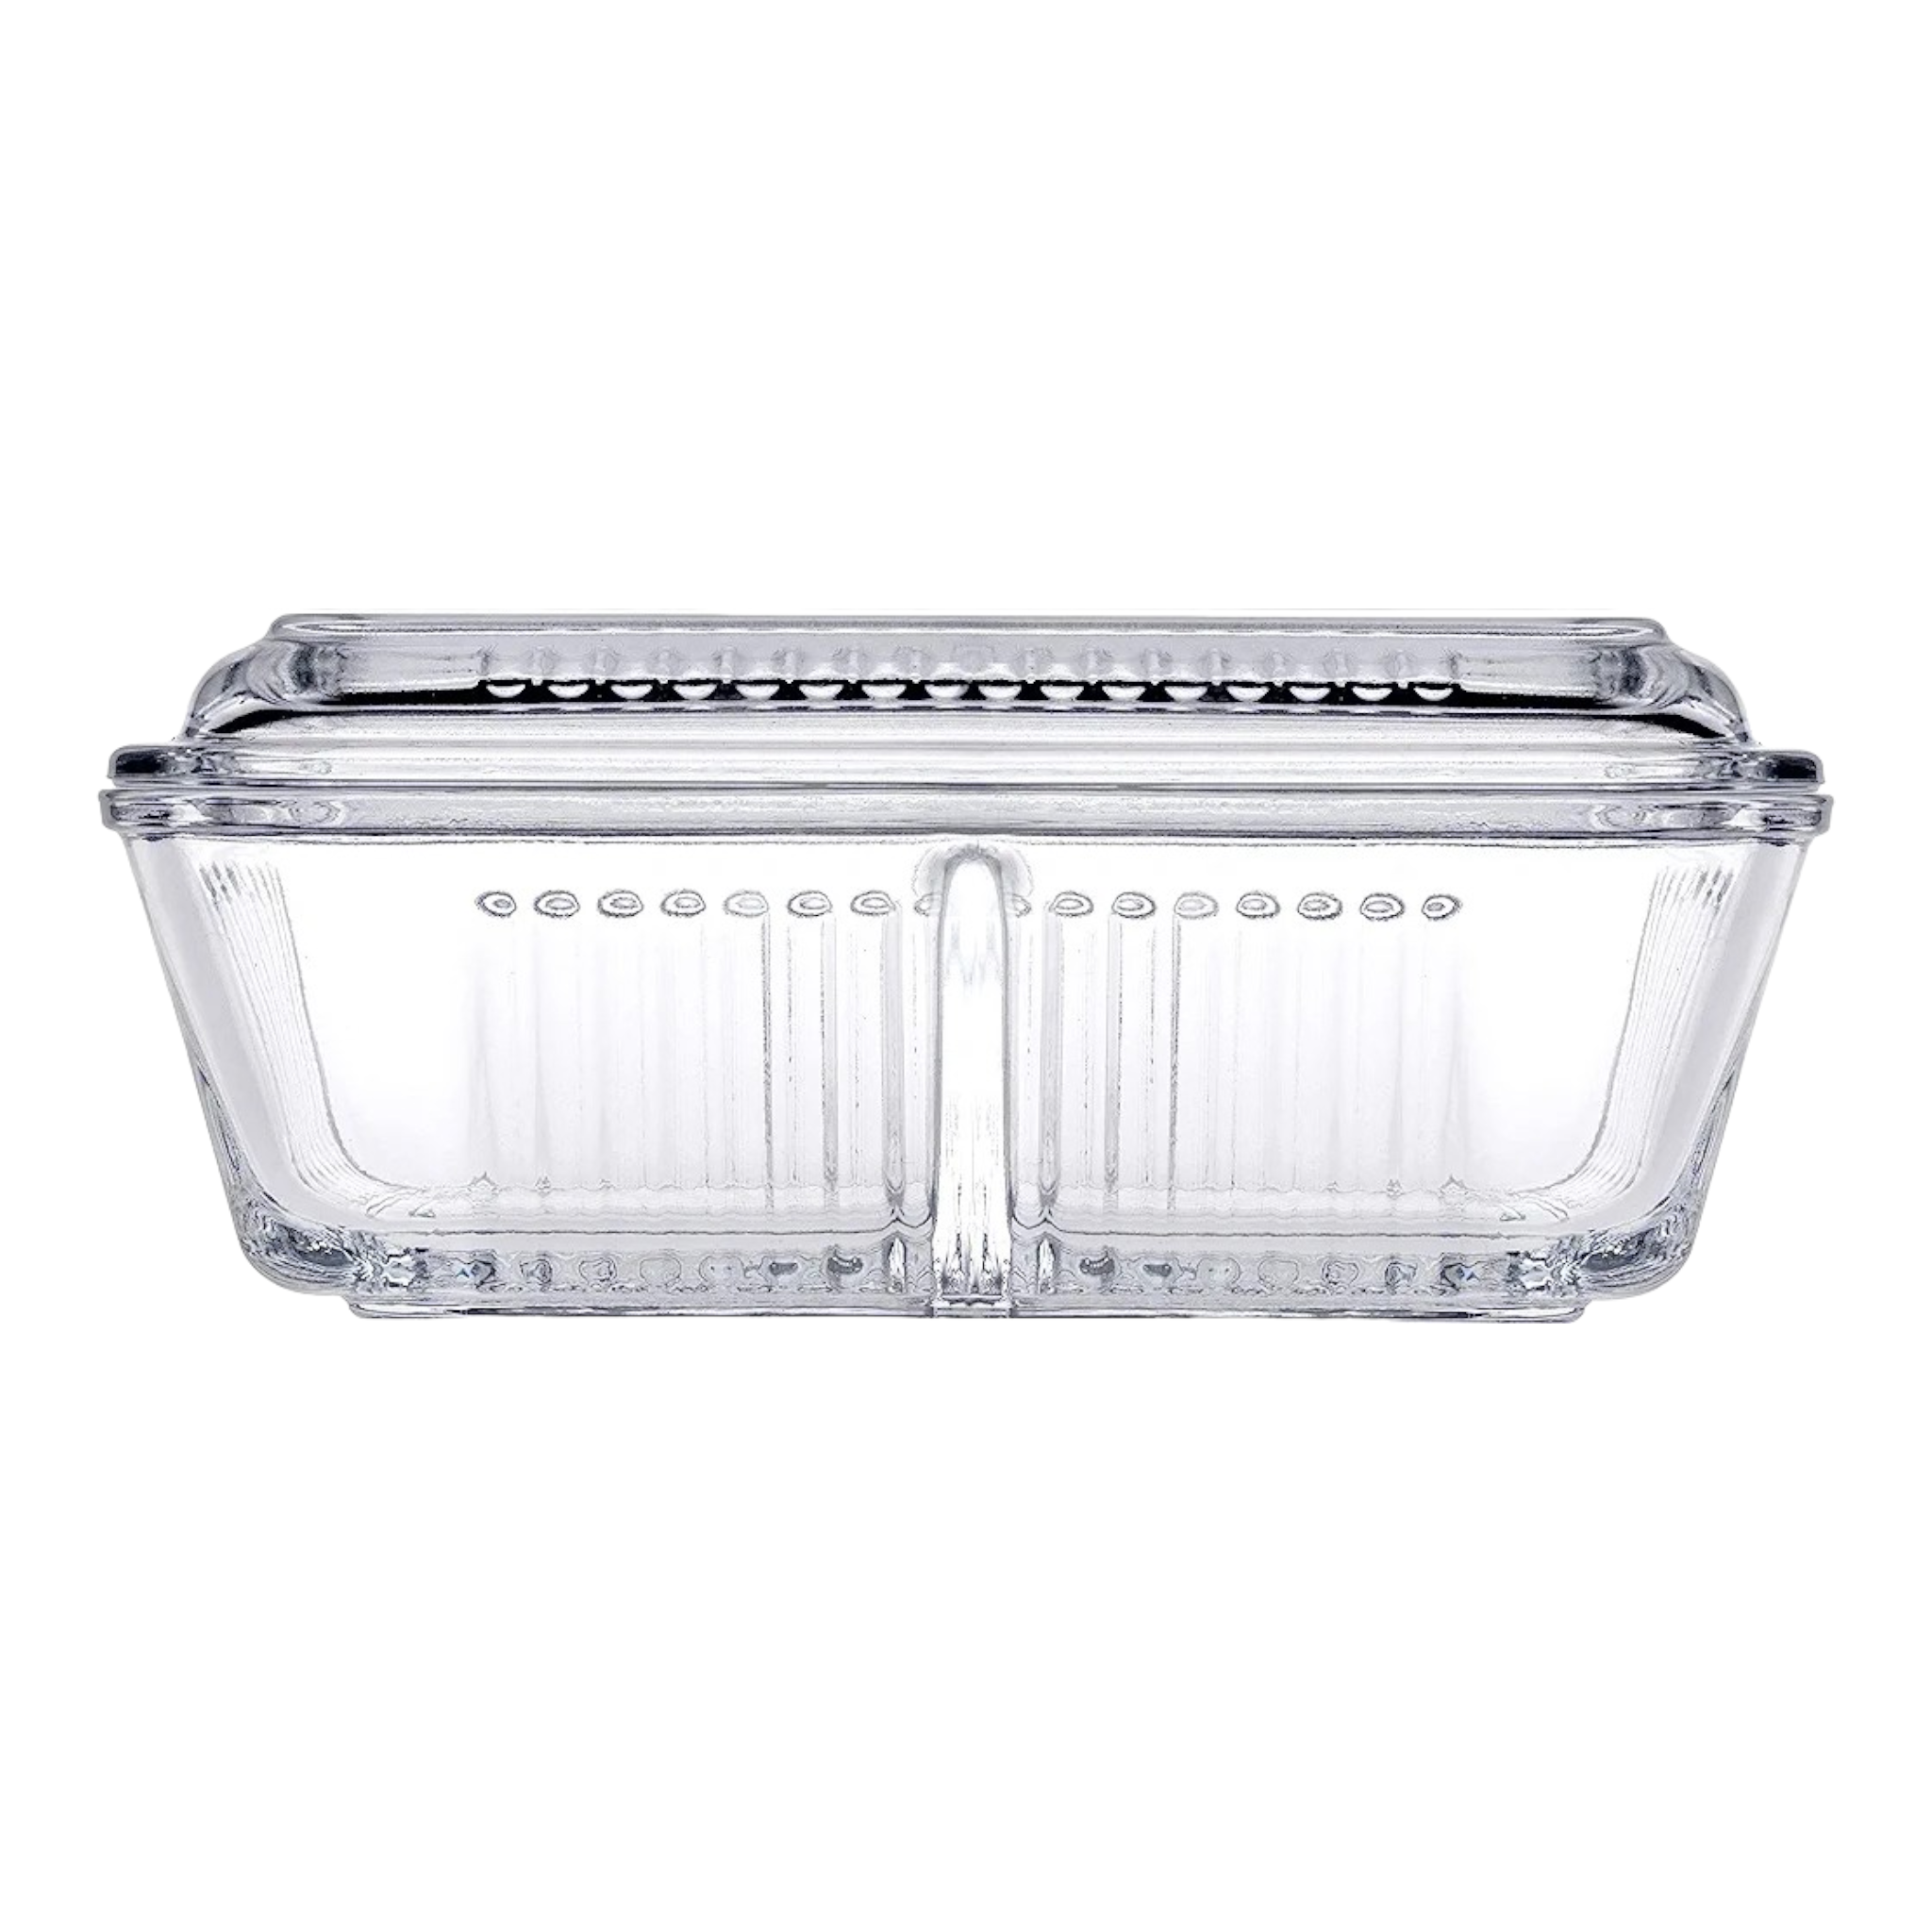 Pasabahce Frigo Glass Storage 2 Compartment Butter Dish 480mm with Lid 23894